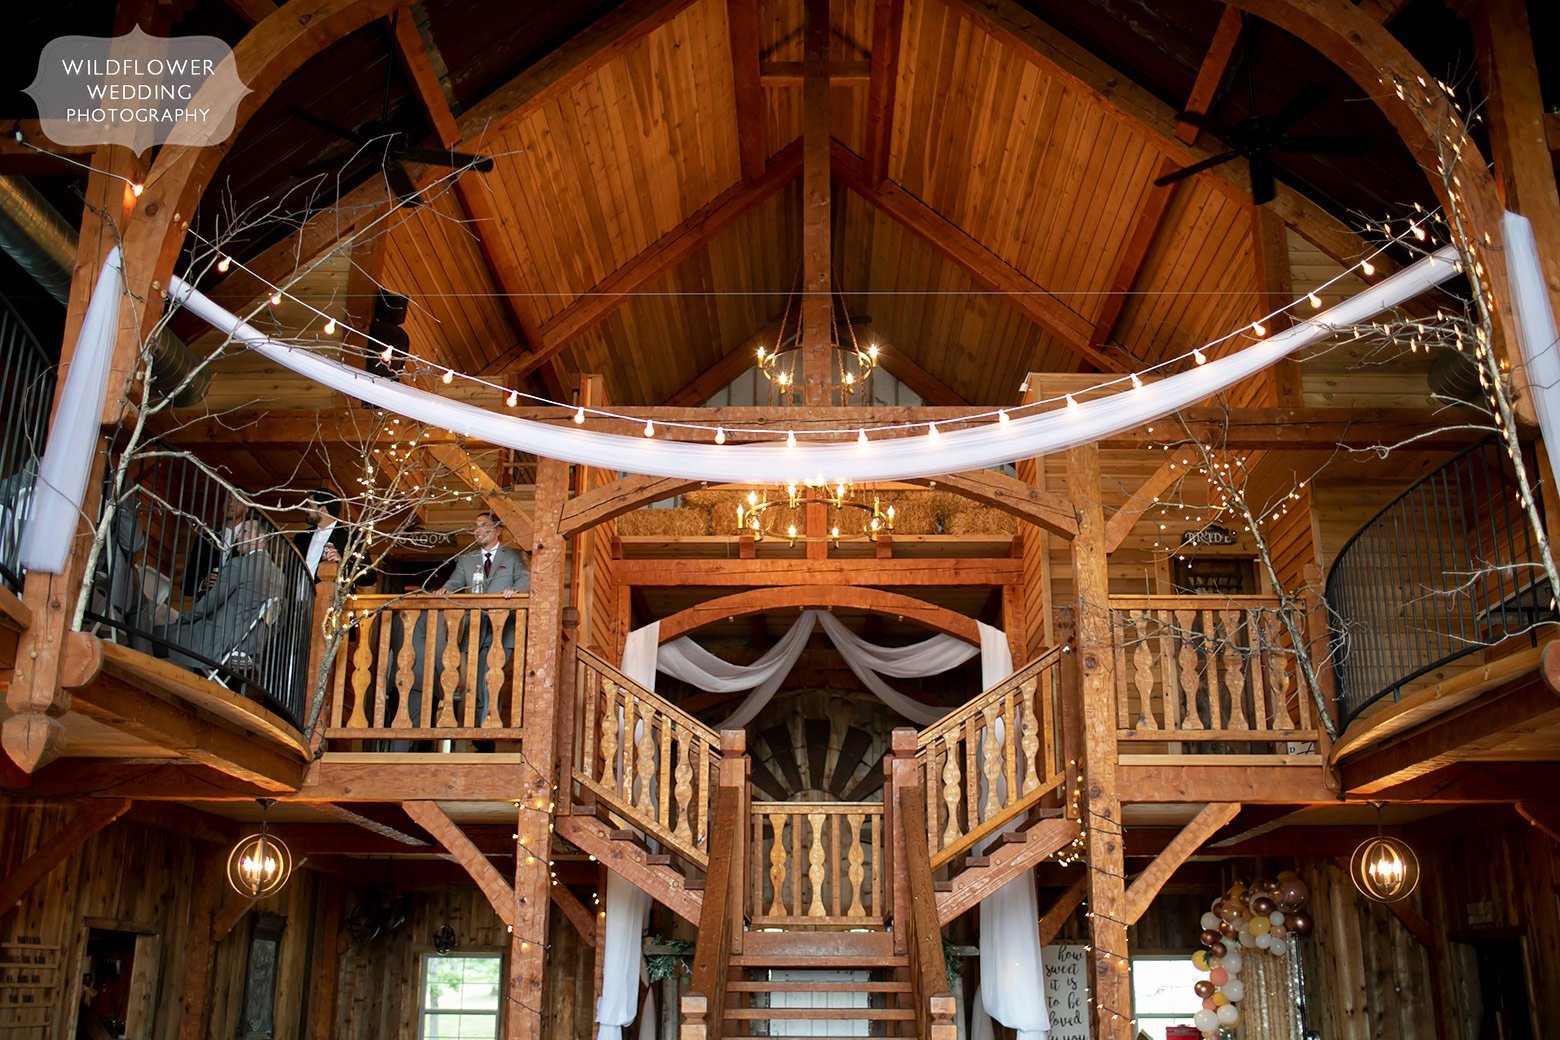 Indoor view of the rustic Weathered Wisdom Barn venue in the Ozarks, MO.